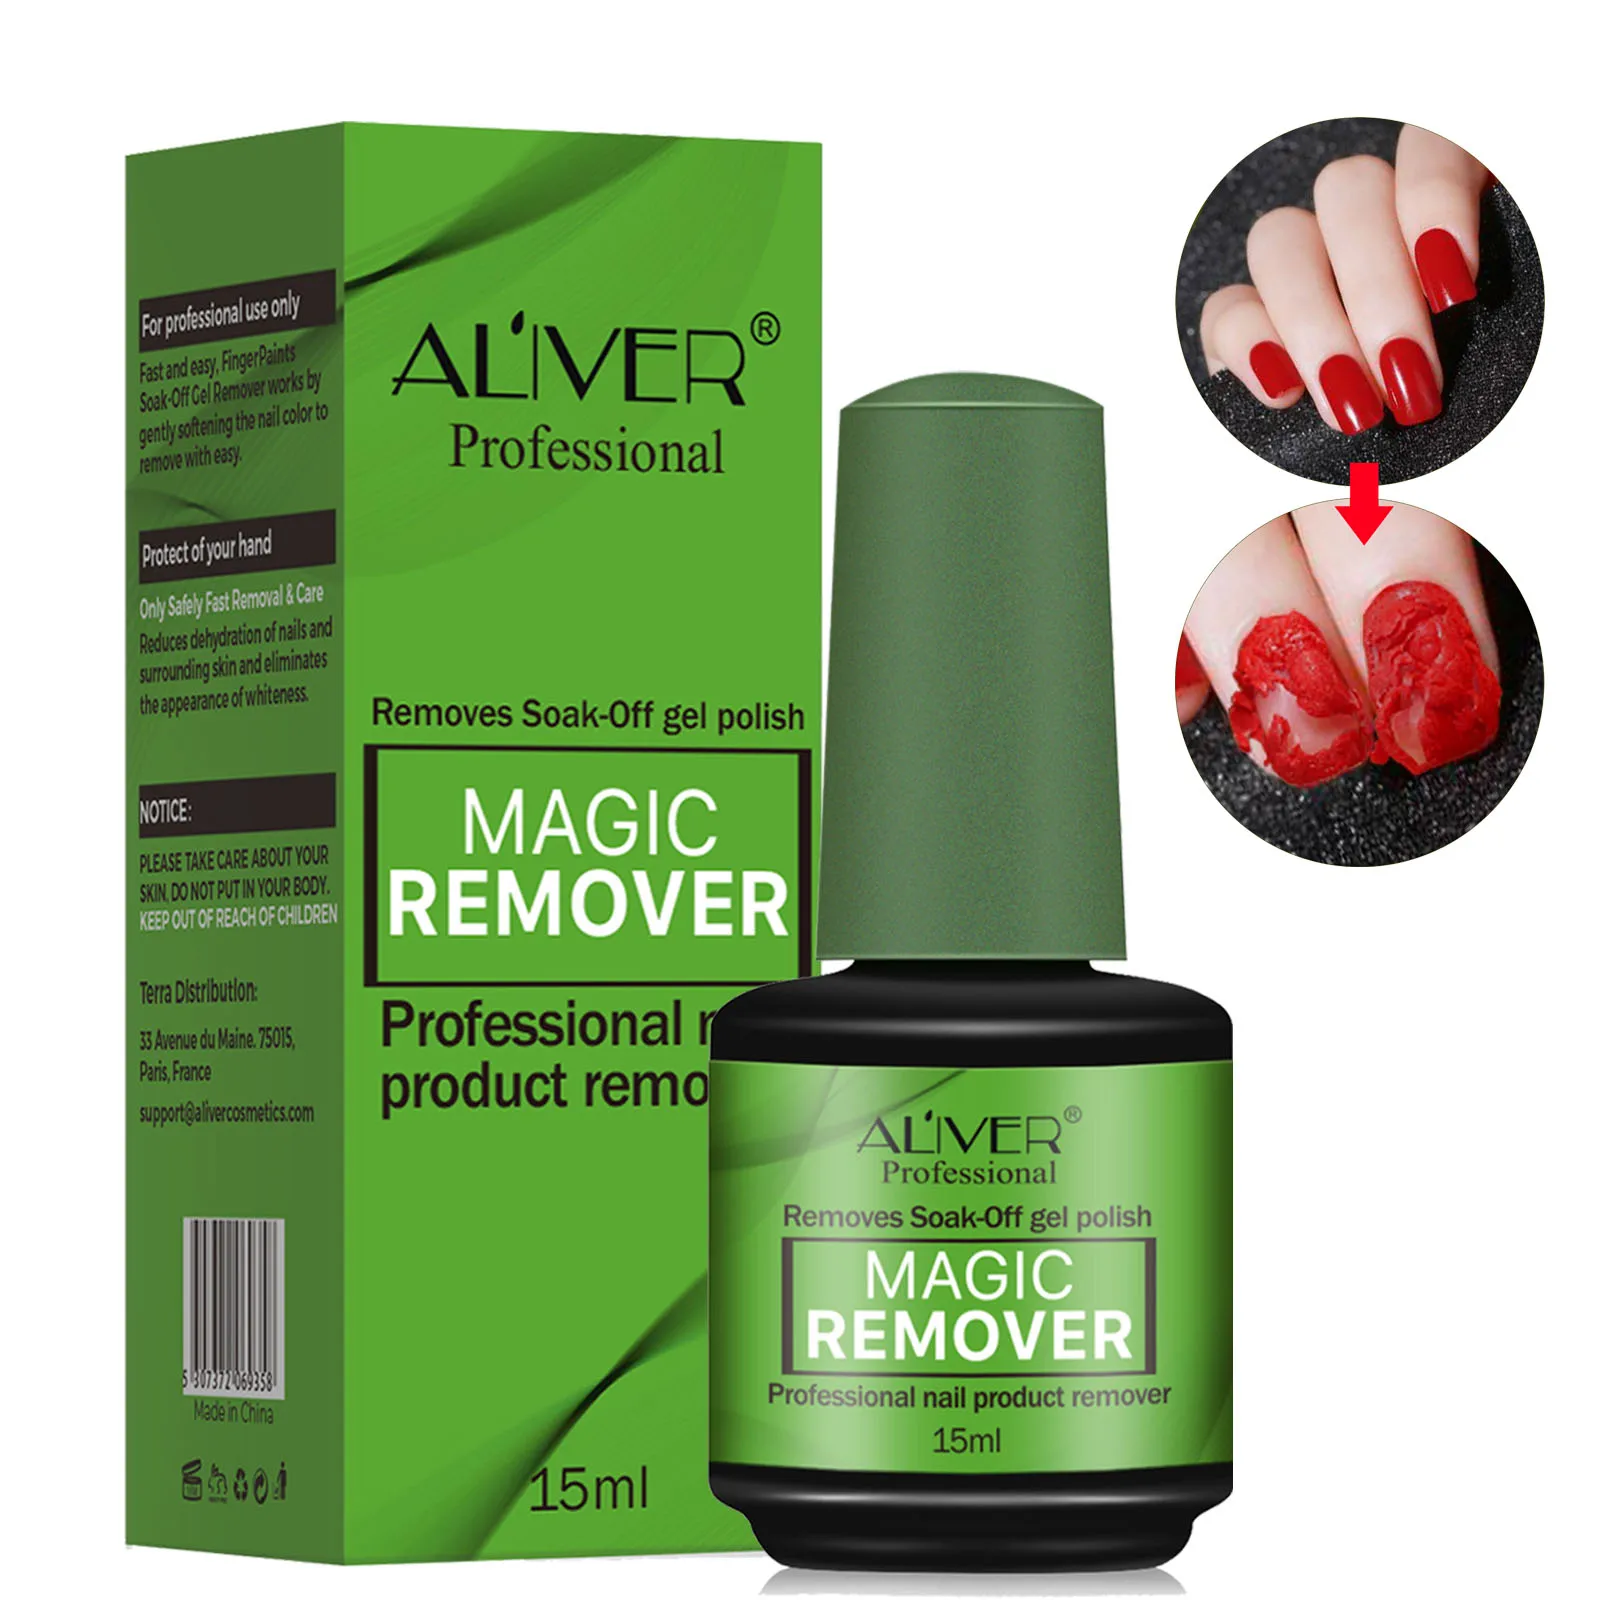 

ALIVER Professional Magic Gel Nail Polish Remover Easily Quickly Removes Soak-Off Gel Nail Polish in 3-5 Minutes For Nail Beauty